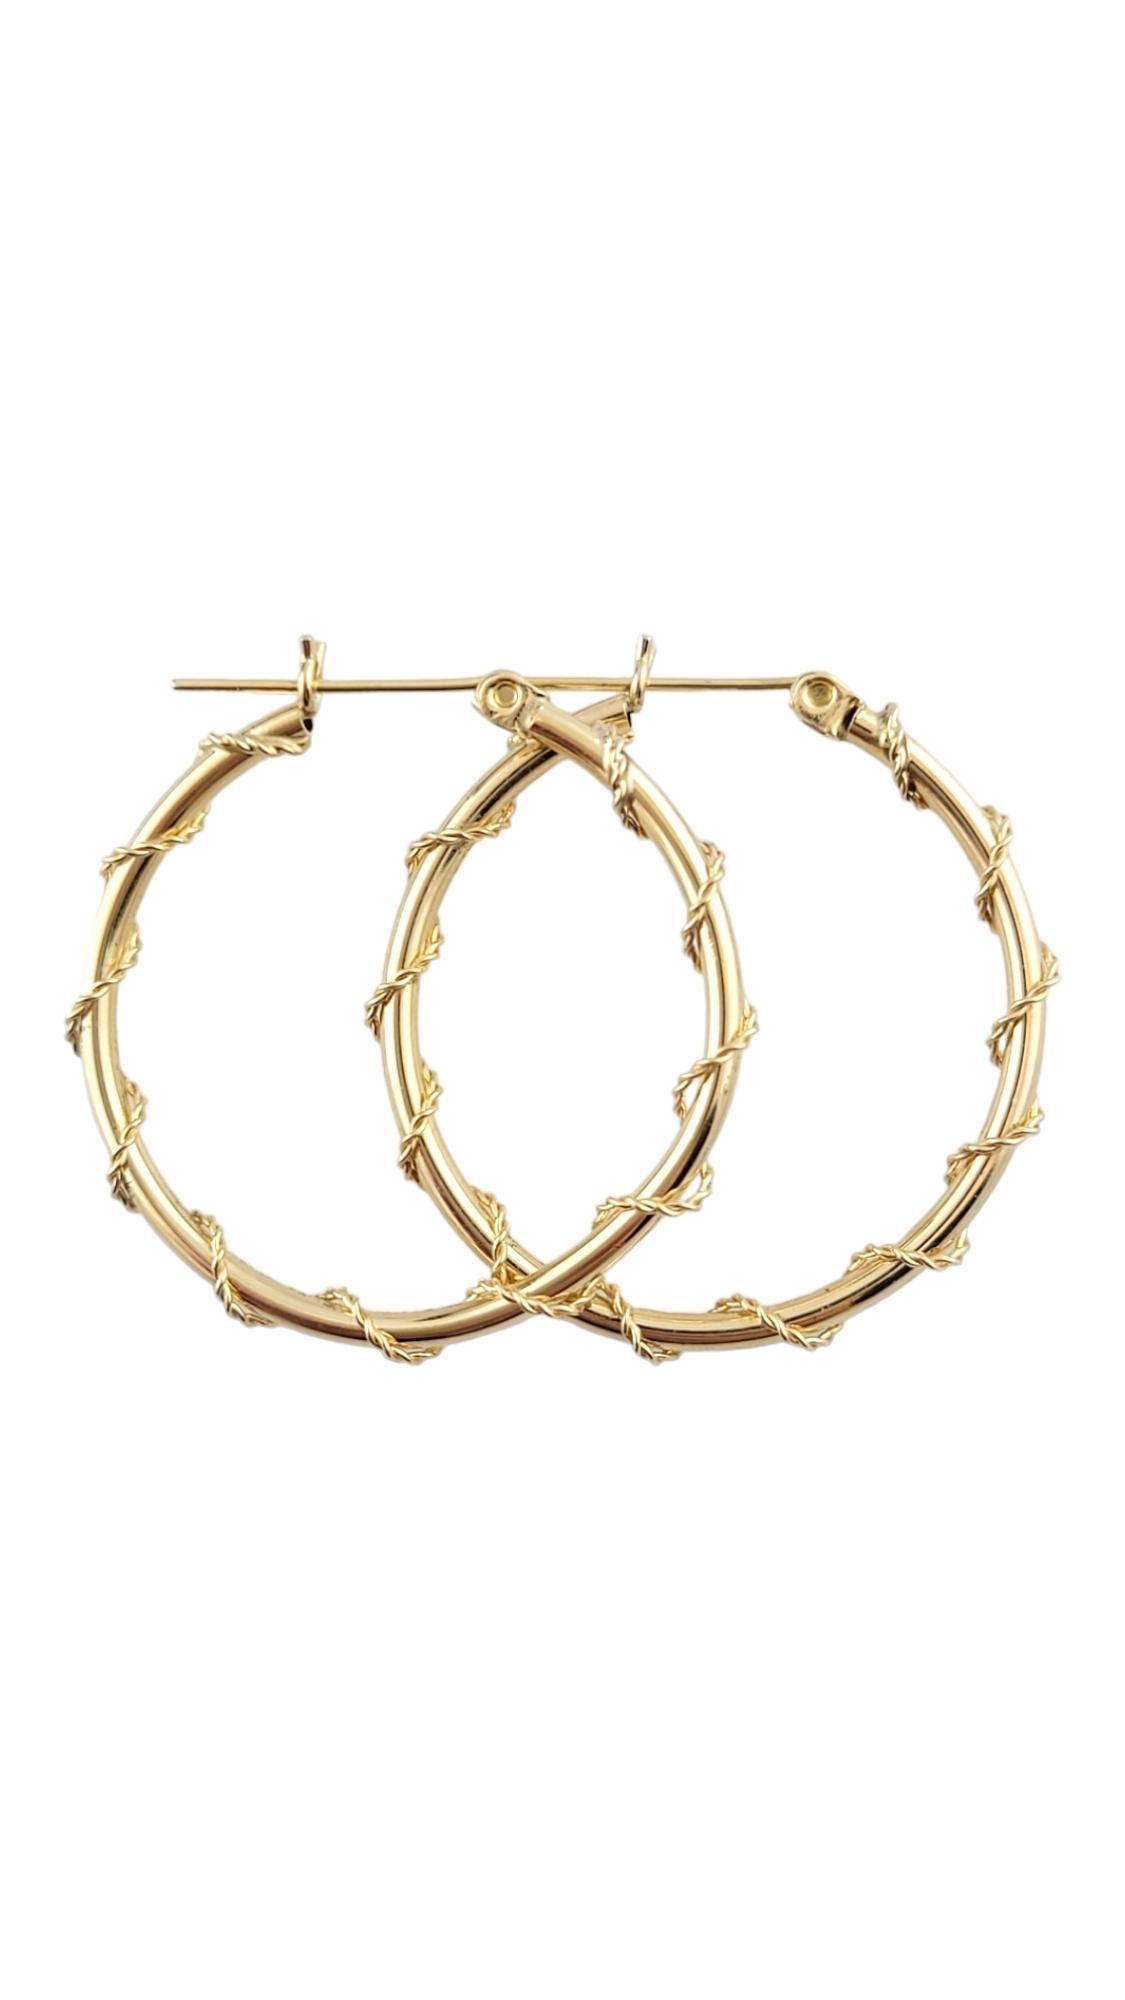 Vintage 14K Yellow Gold Hoop Earrings

This gorgeous et of 14K gold circle hoop earrings have a beautiful, twisted rope design that wraps around the hoop!

Diameter: 29.15mm 
Width: 3.15mm

Weight: 2.4 g/ 1.5 dwt

Hallmark: 14K

Very good condition,